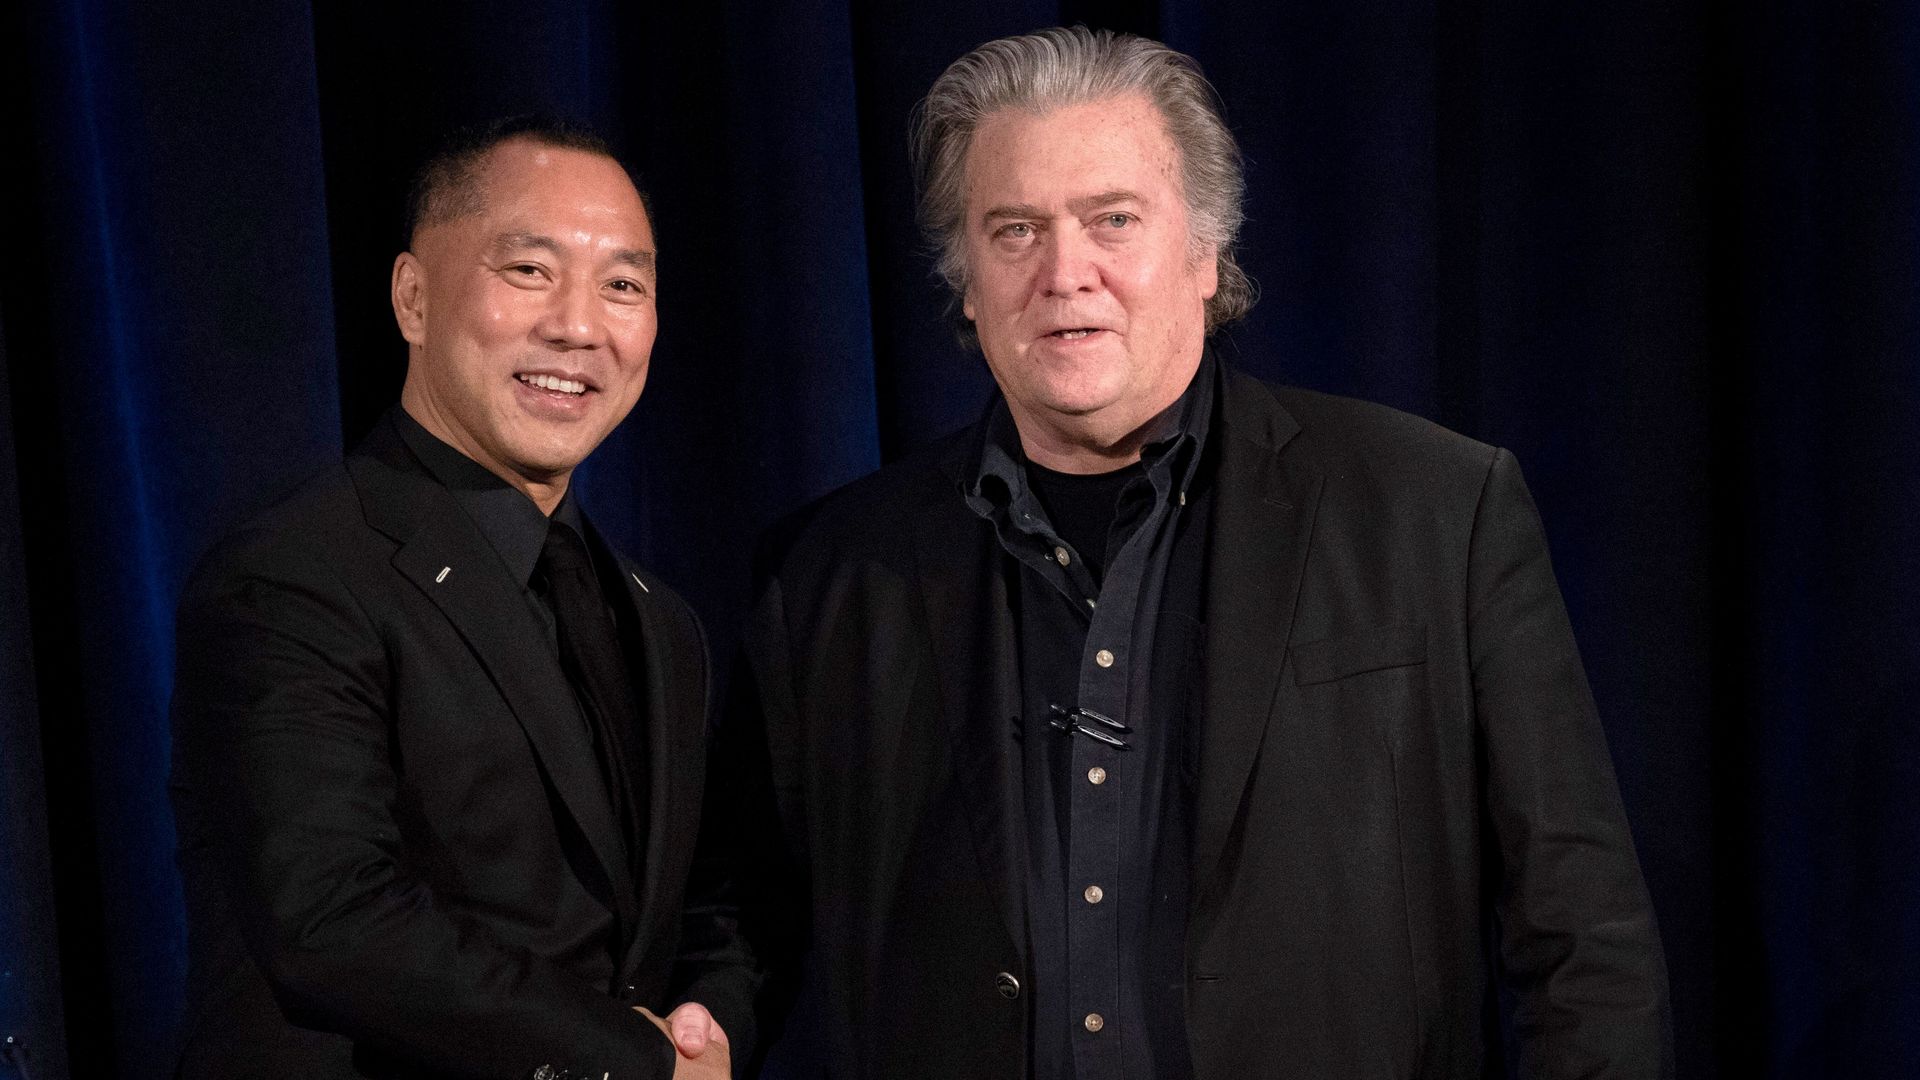 Former White House Chief Strategist Steve Bannon greeting Chinese billionaire Guo Wengui in France in July 2018.